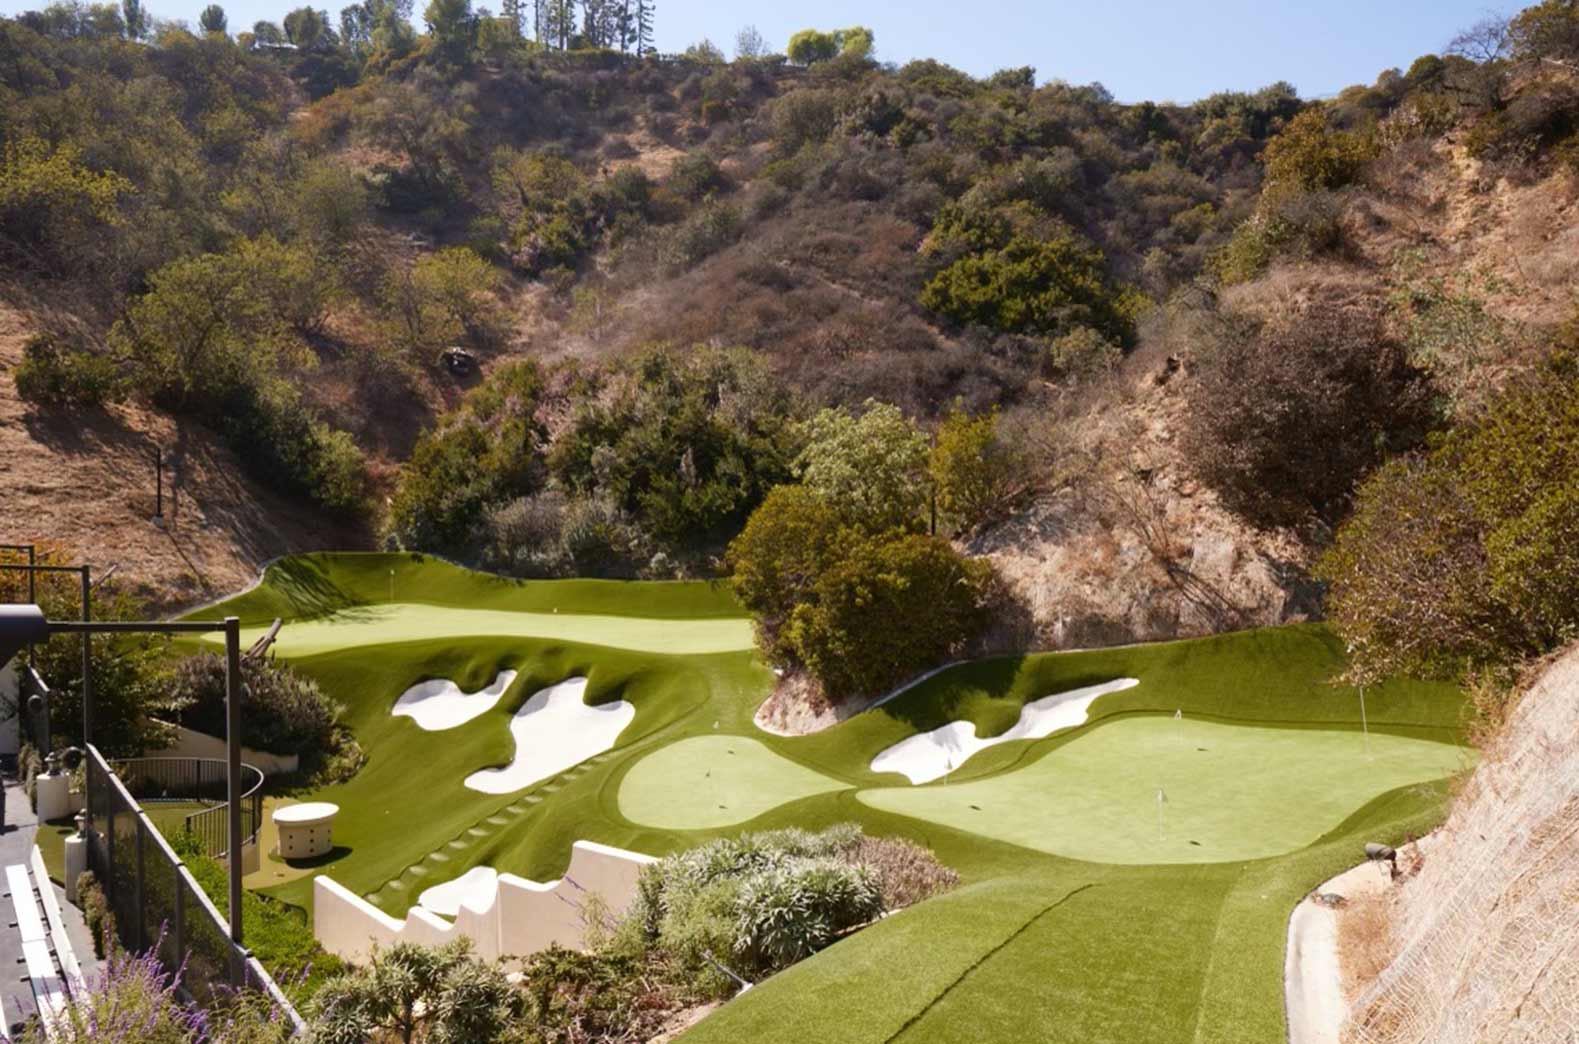 Mark Wahlberg Backyard Golf Course Ready To Be Green With Envy?